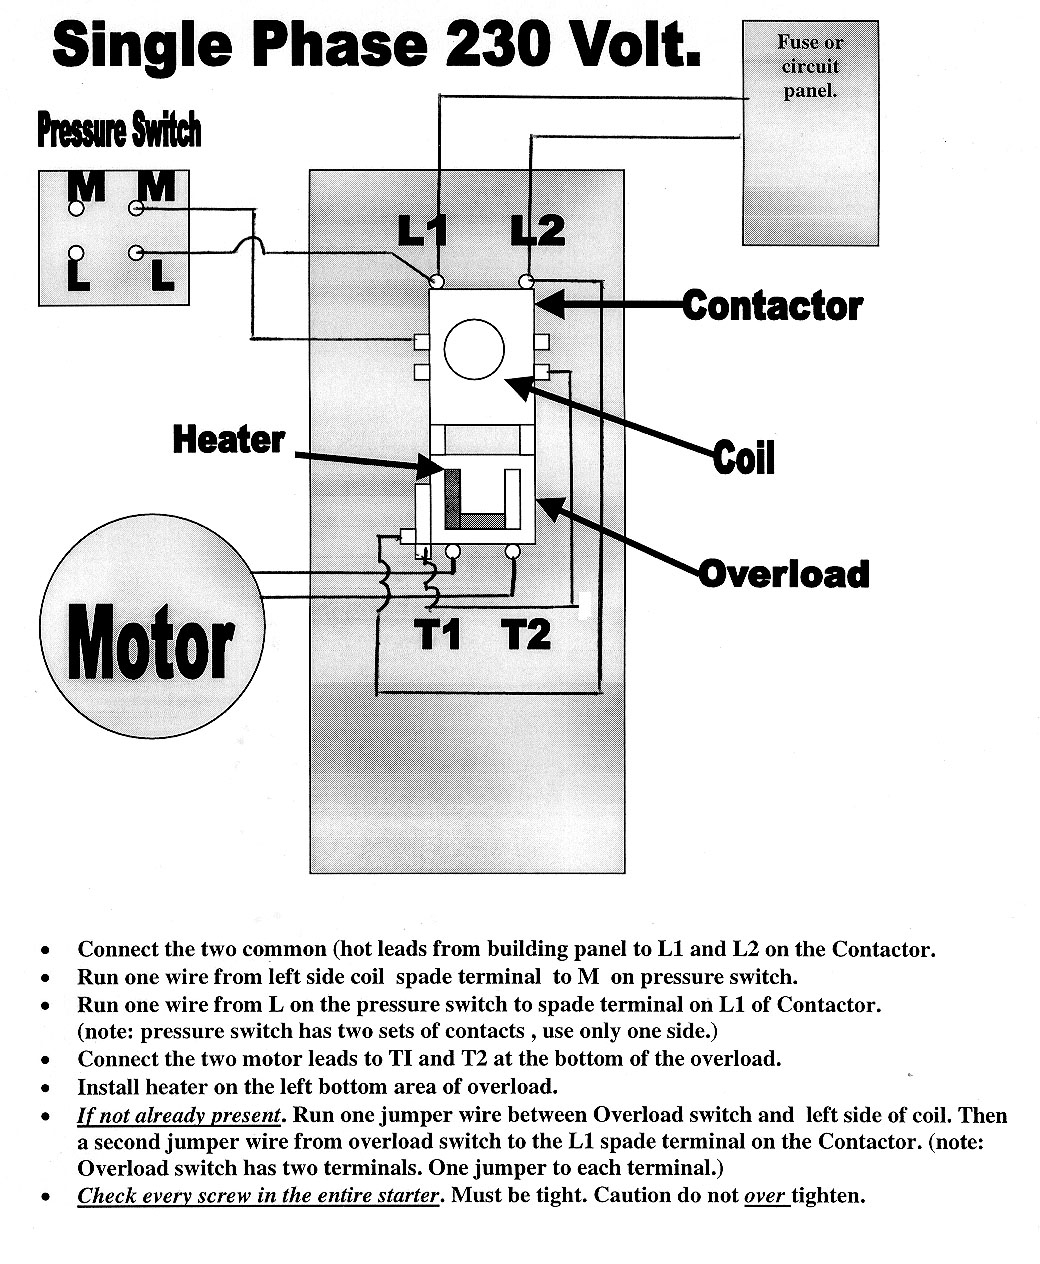 Single Phase 240 Volt Residential Wiring Diagram | Wiring Diagram - 3 Phase To Single Phase Wiring Diagram